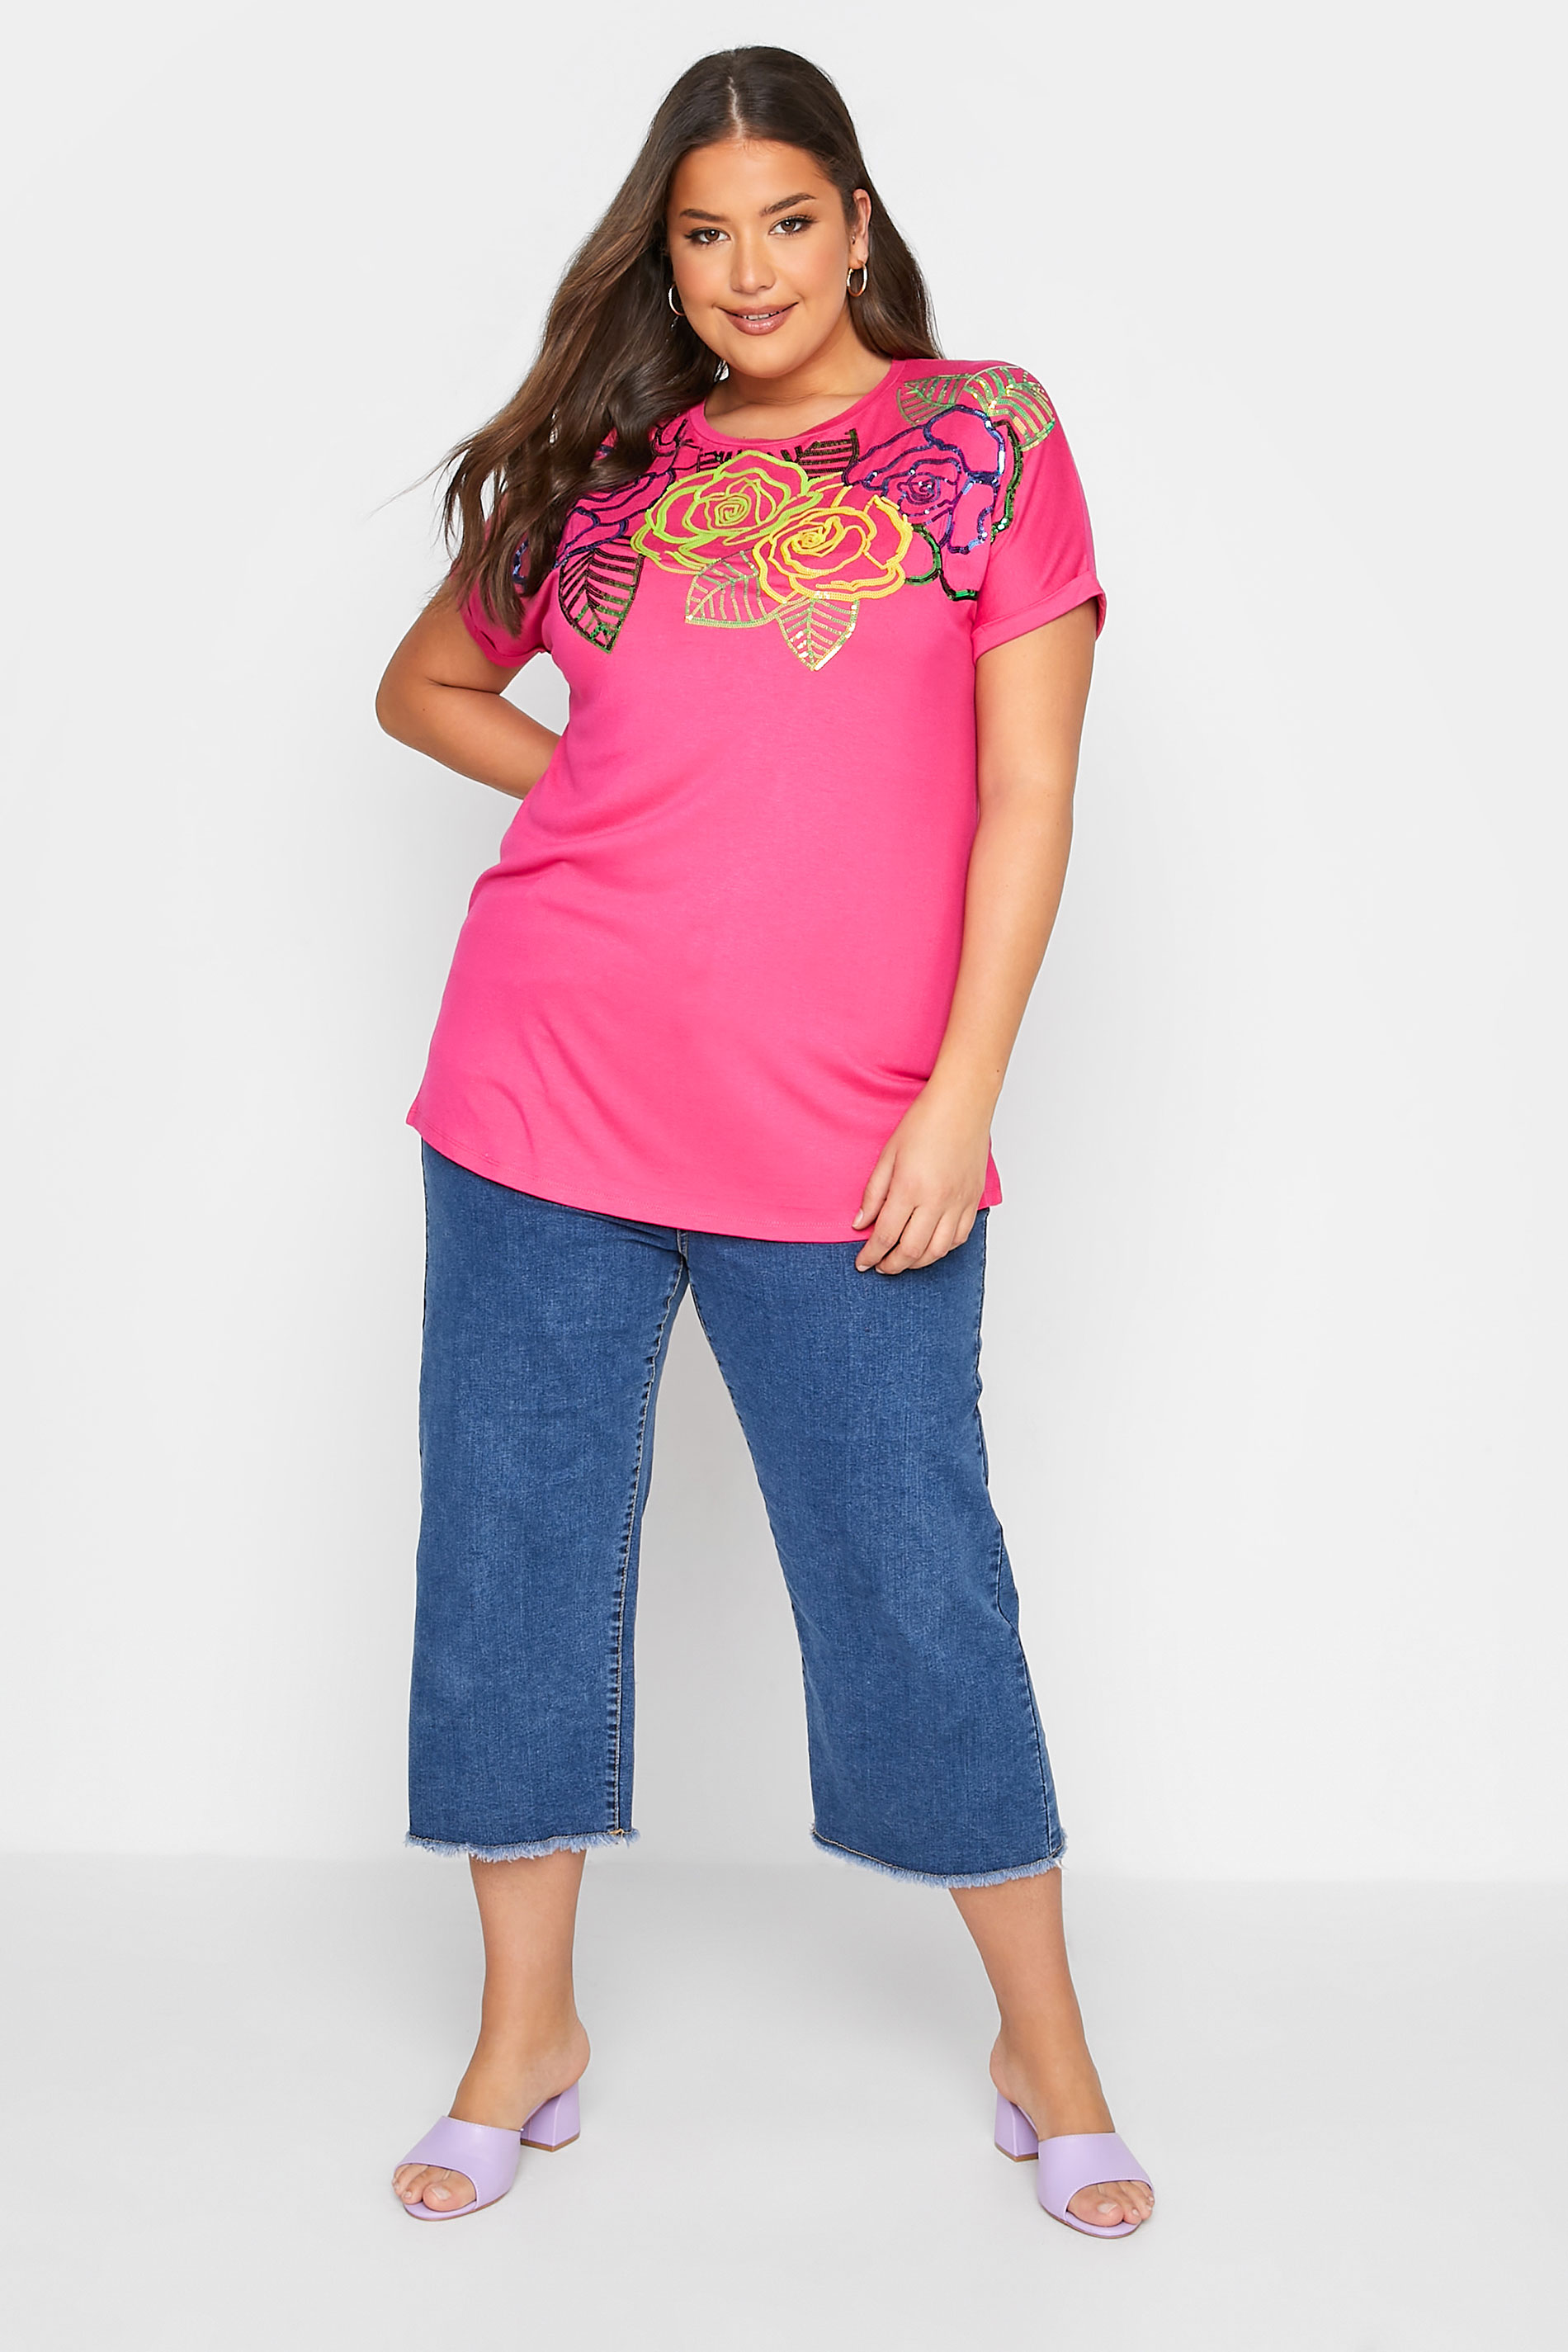 Grande taille  Tops Grande taille  Tops Jersey | T-Shirt Rose Empiècement Floral Sequins - HO41428